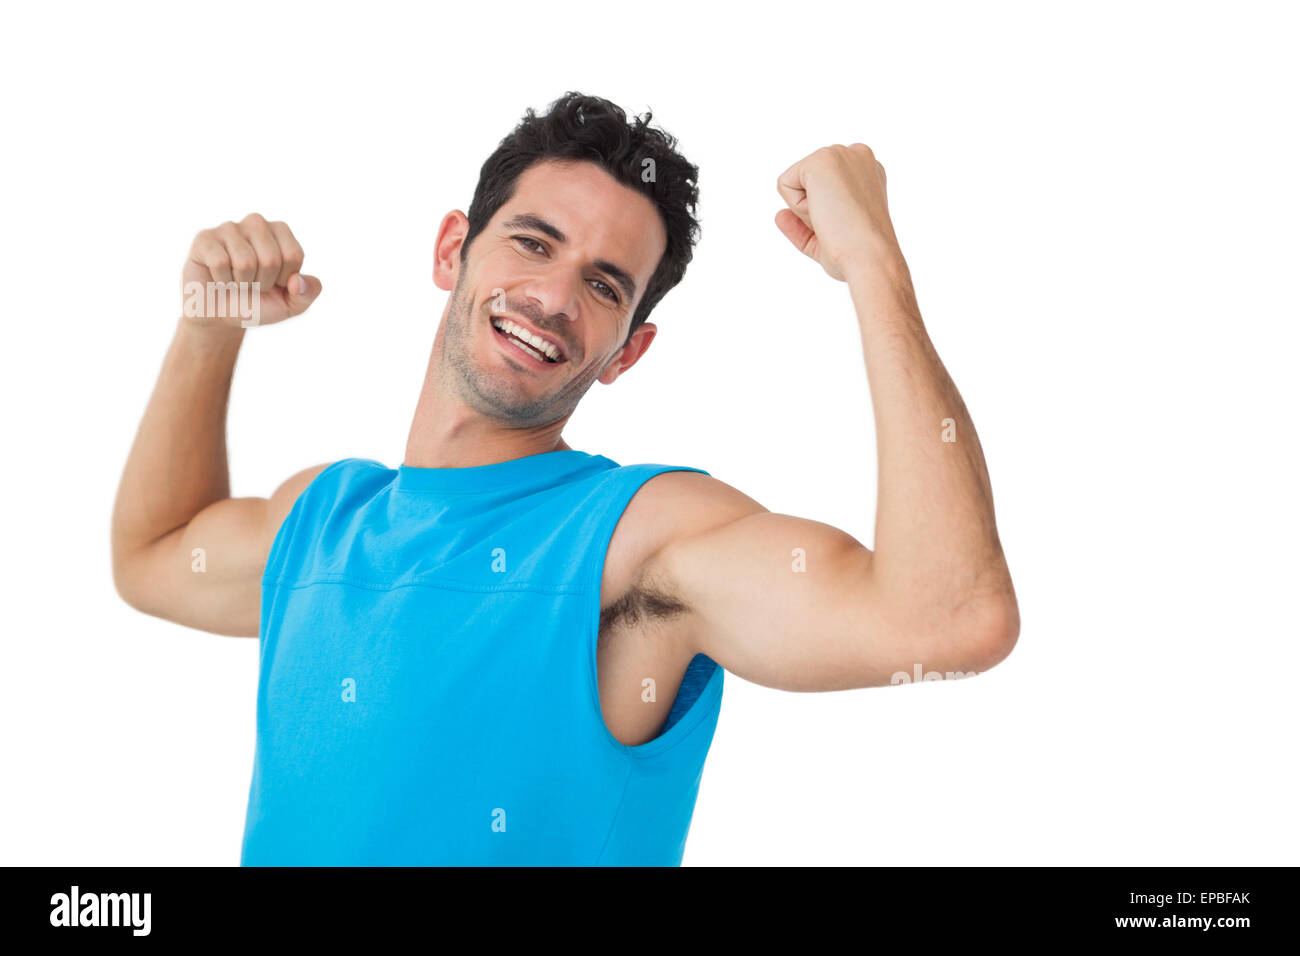 Portrait of a smiling young man flexing muscles Stock Photo